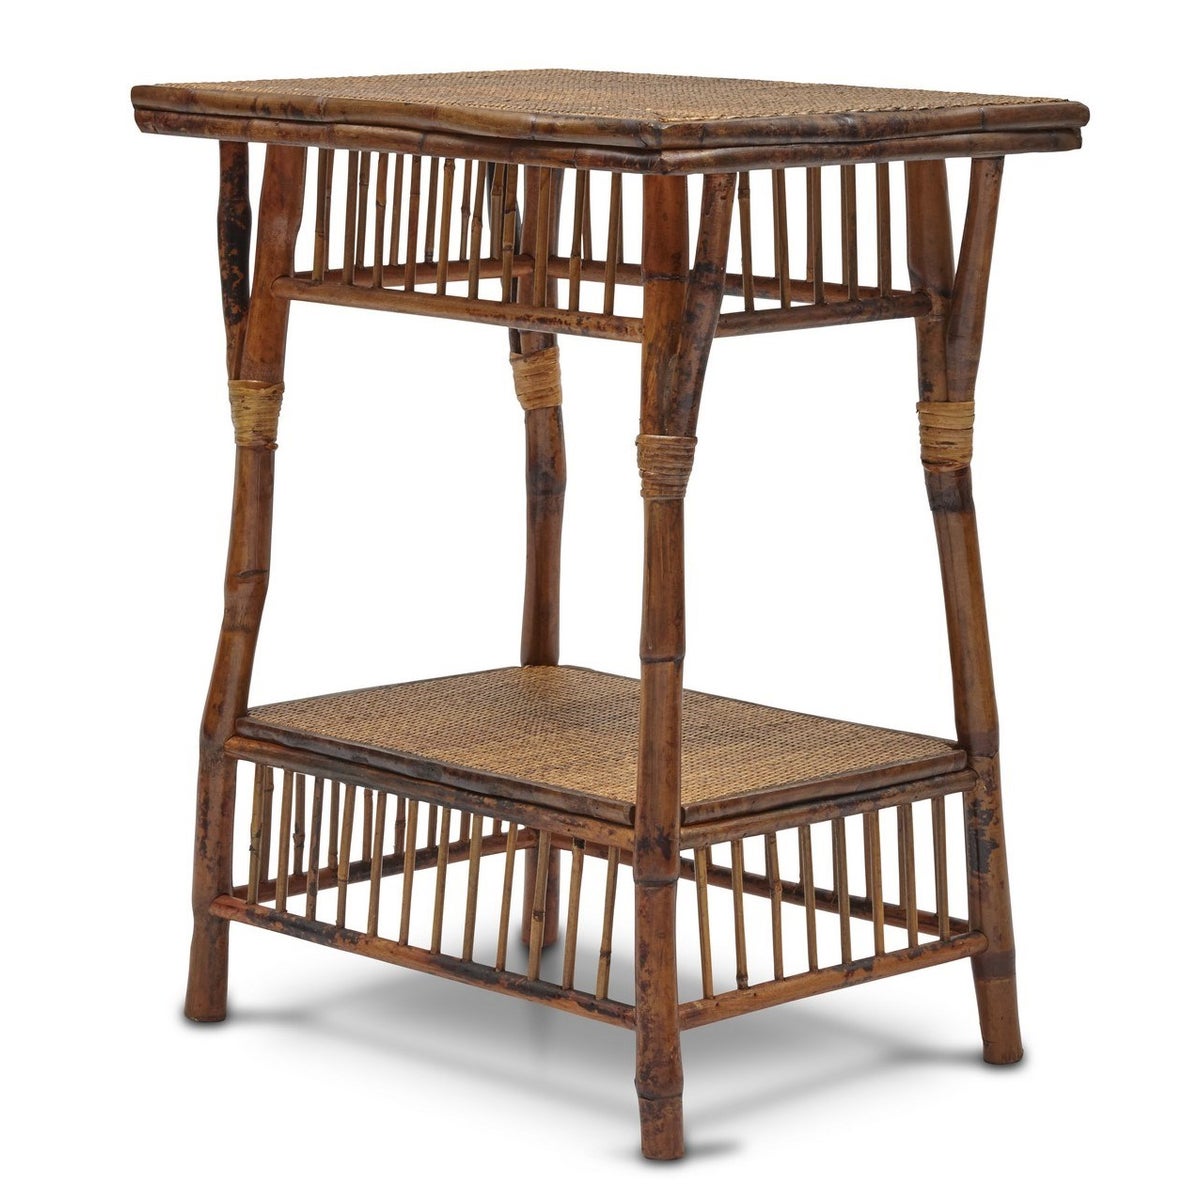 Bombay Side Table Woven Top and Shelf Frame Color - Antique Tortoise